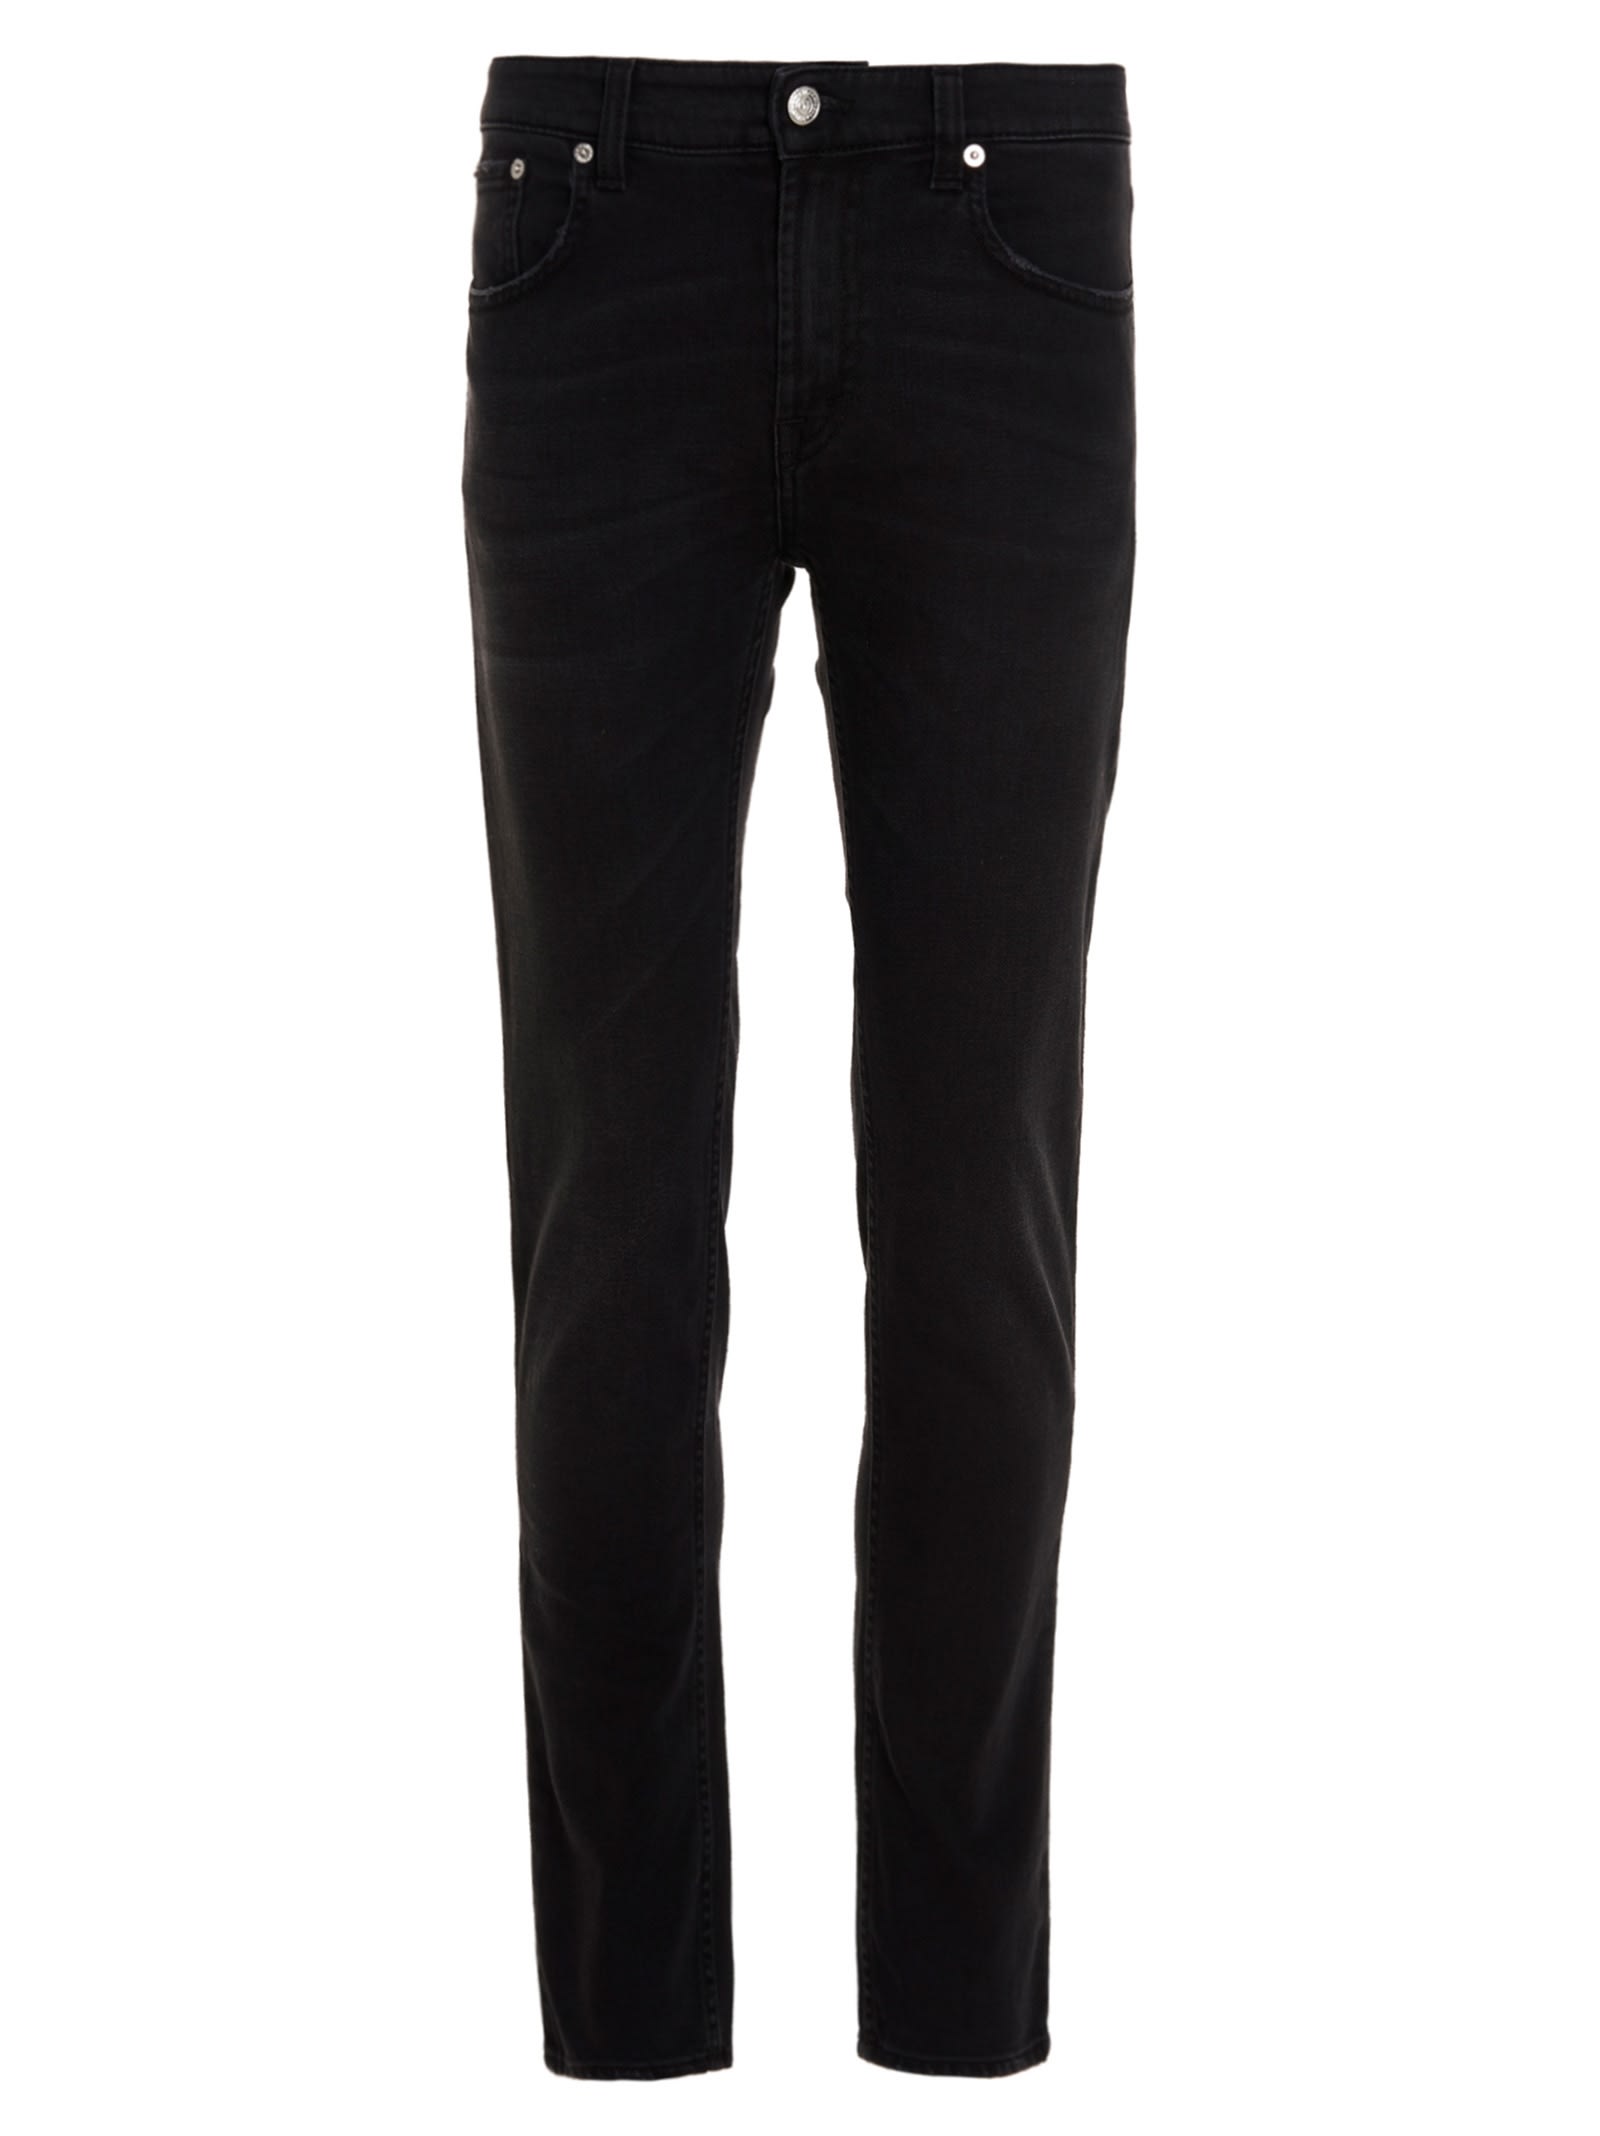 Department Five skeith Jeans